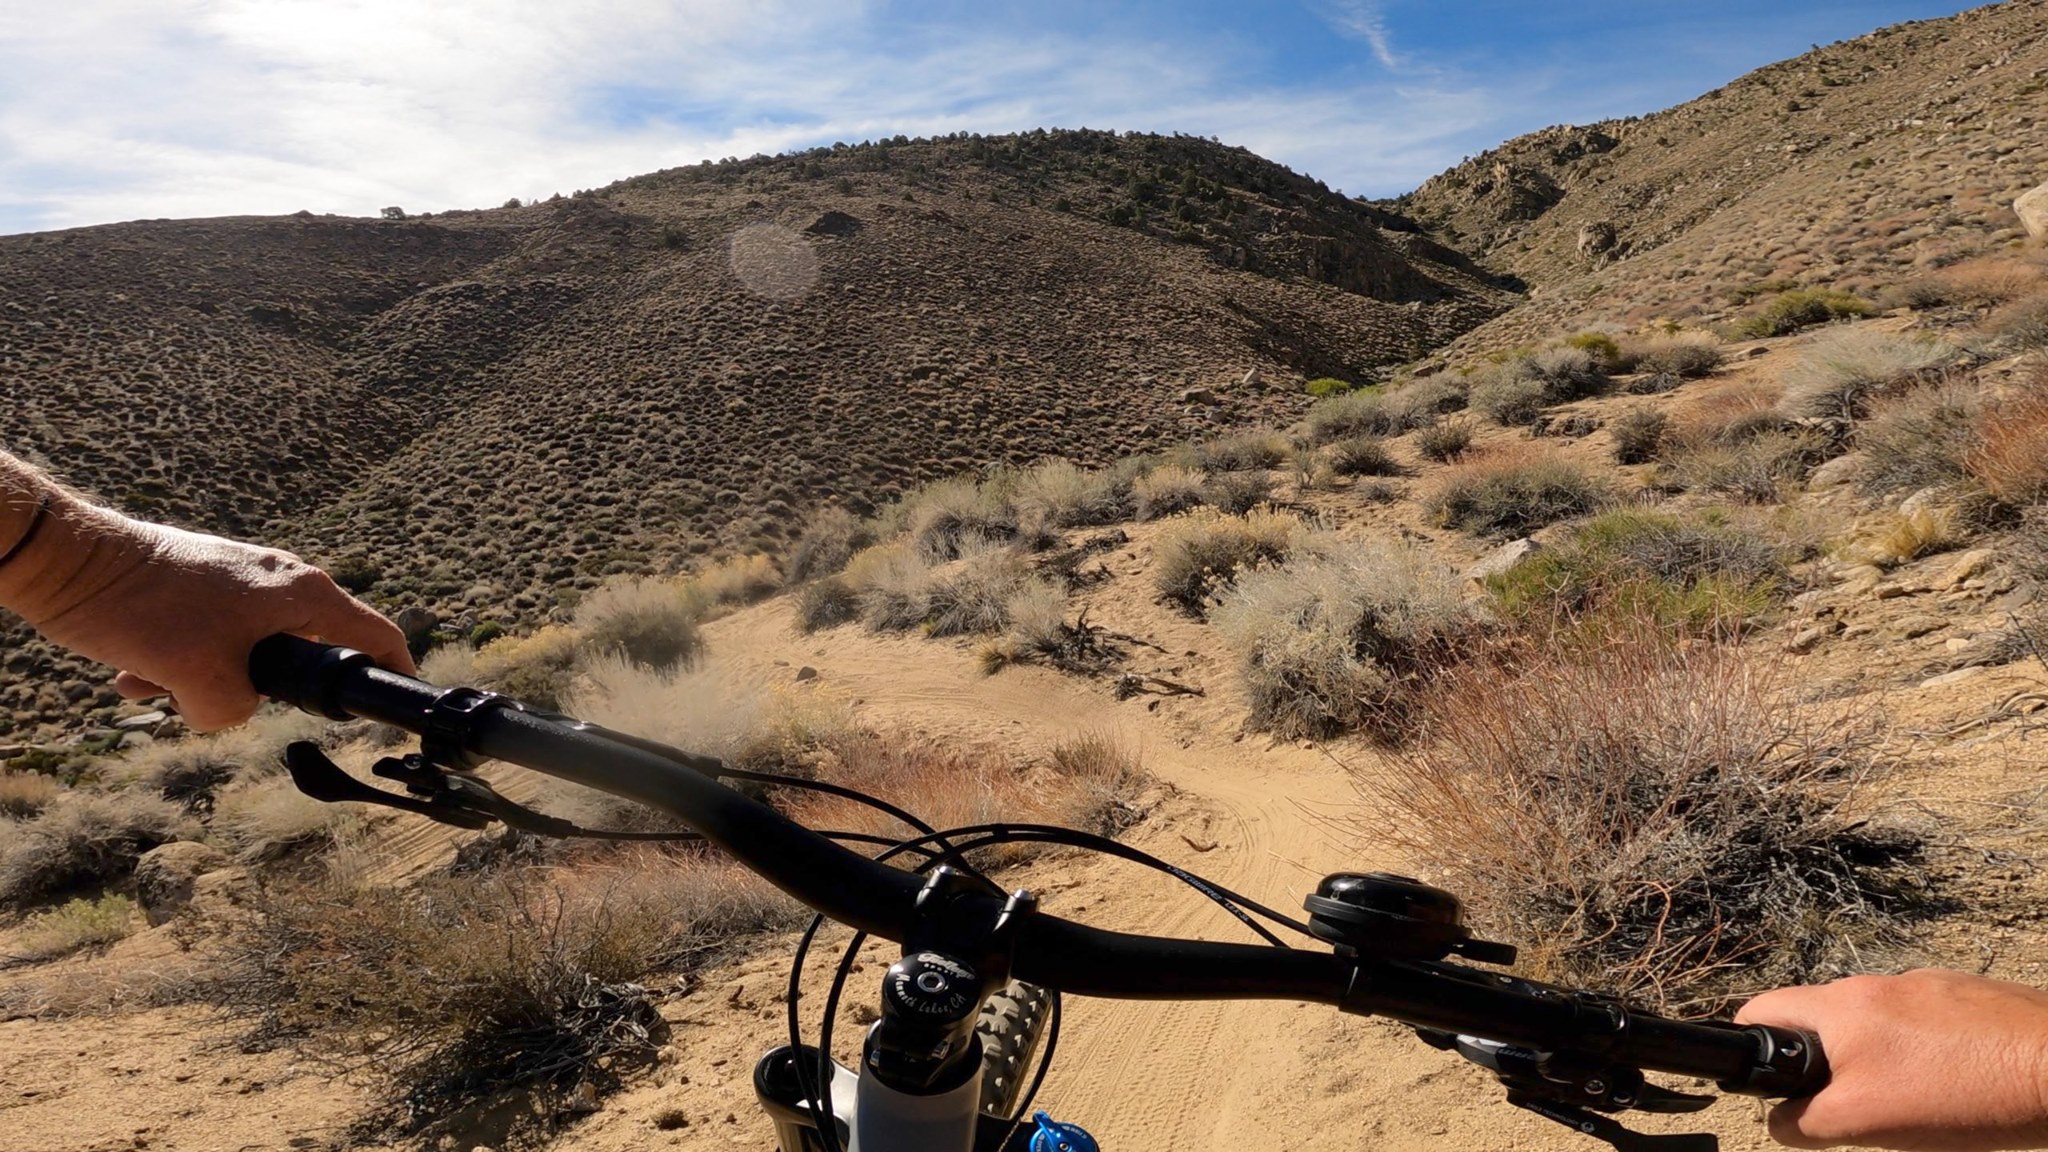 Riding in the foothills above Bishop on an old OHV Moto Cross Trail